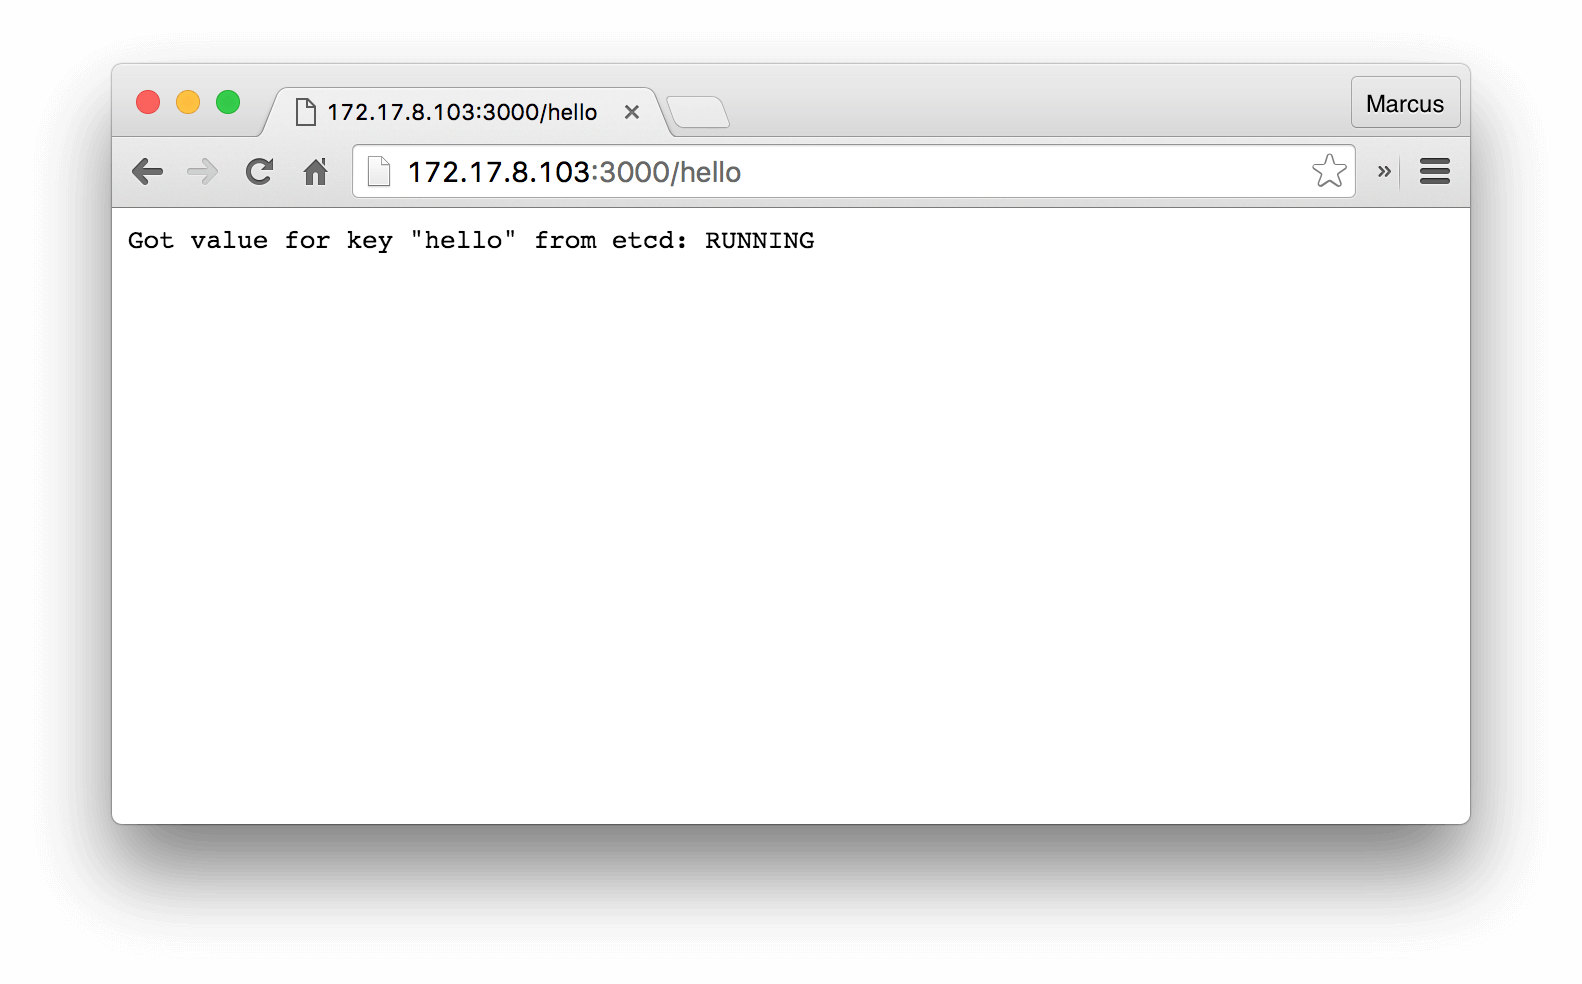 Node.js app running in CoreOS cluster and reads keys from etcd